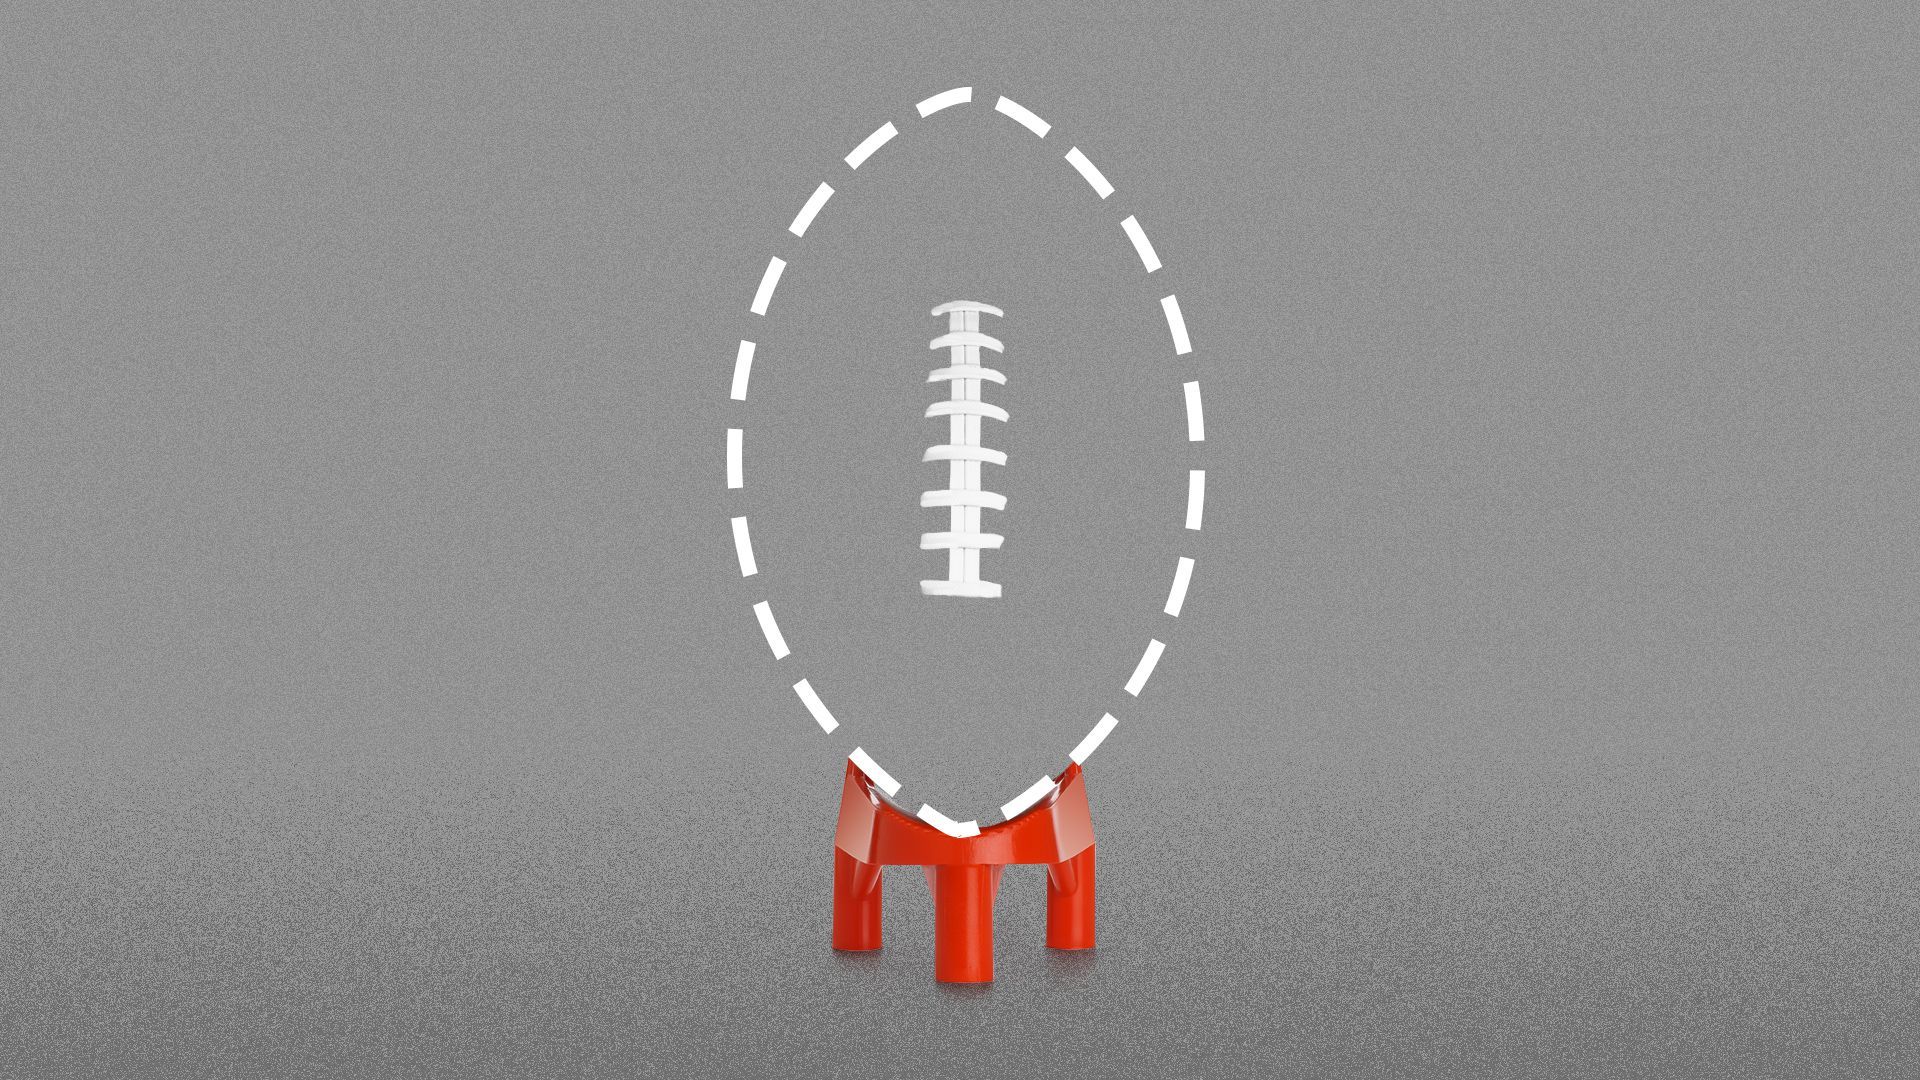 Illustration of an outline of a football on a kickoff stand